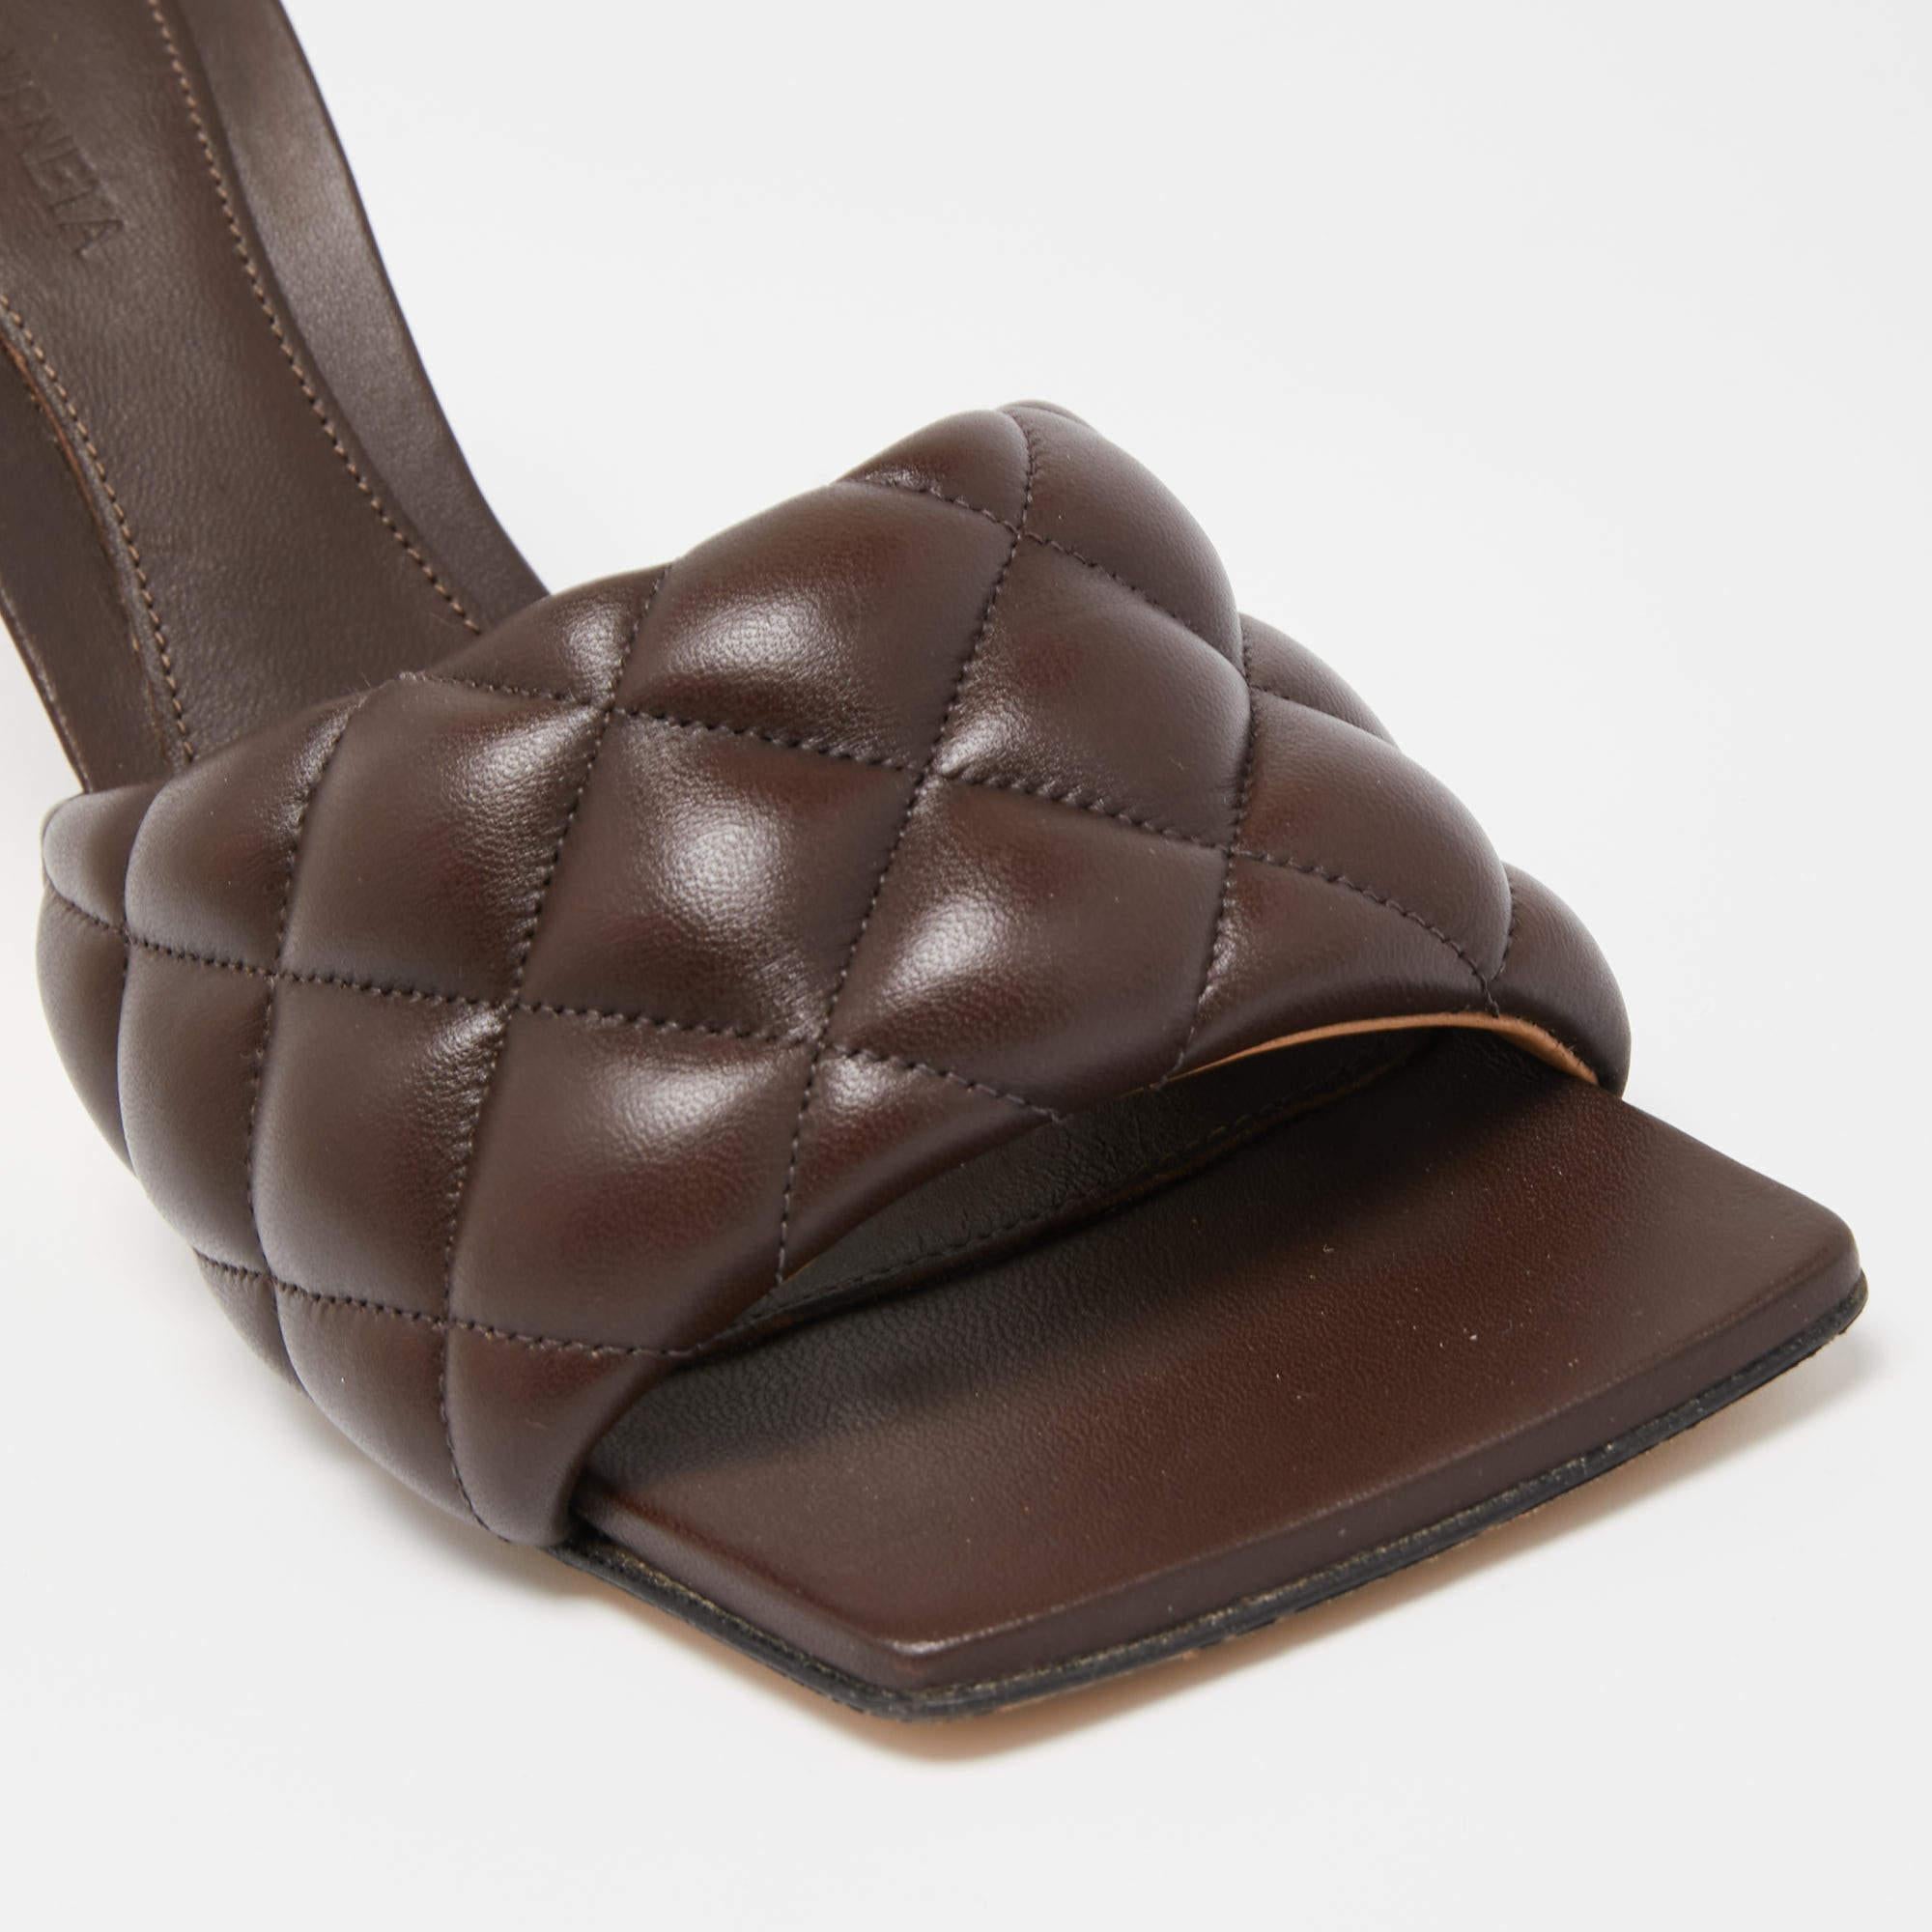 One of the most hot-selling designs, the Bottega Veneta padded sandals, adorn the feet of top celebrities and influences. These beauties have been crafted from leather featuring an Intrecciato-style quilt. Style these sandals with denim jeans on